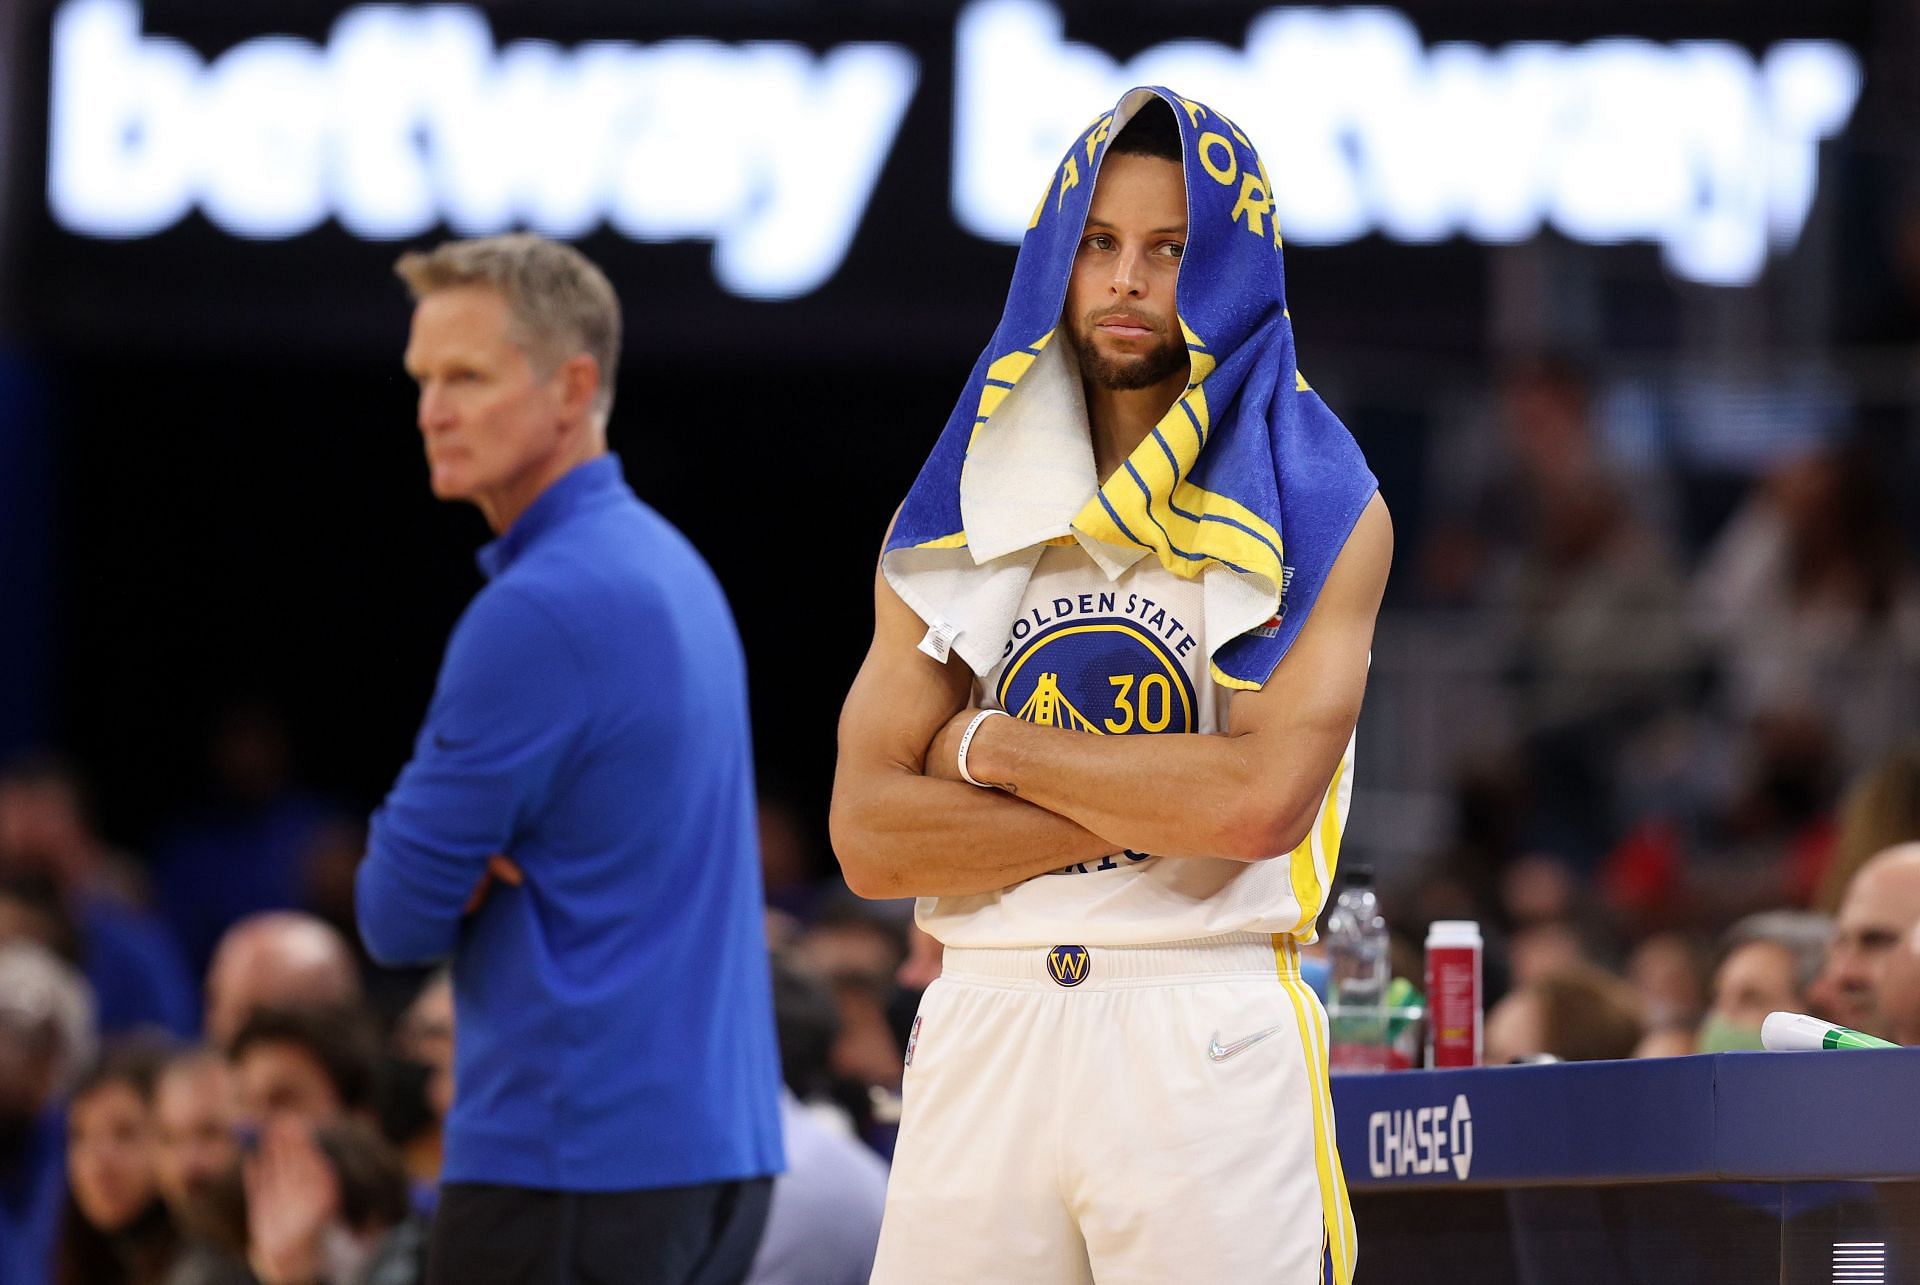 Steve Kerr and Steph Curry watch on during a game